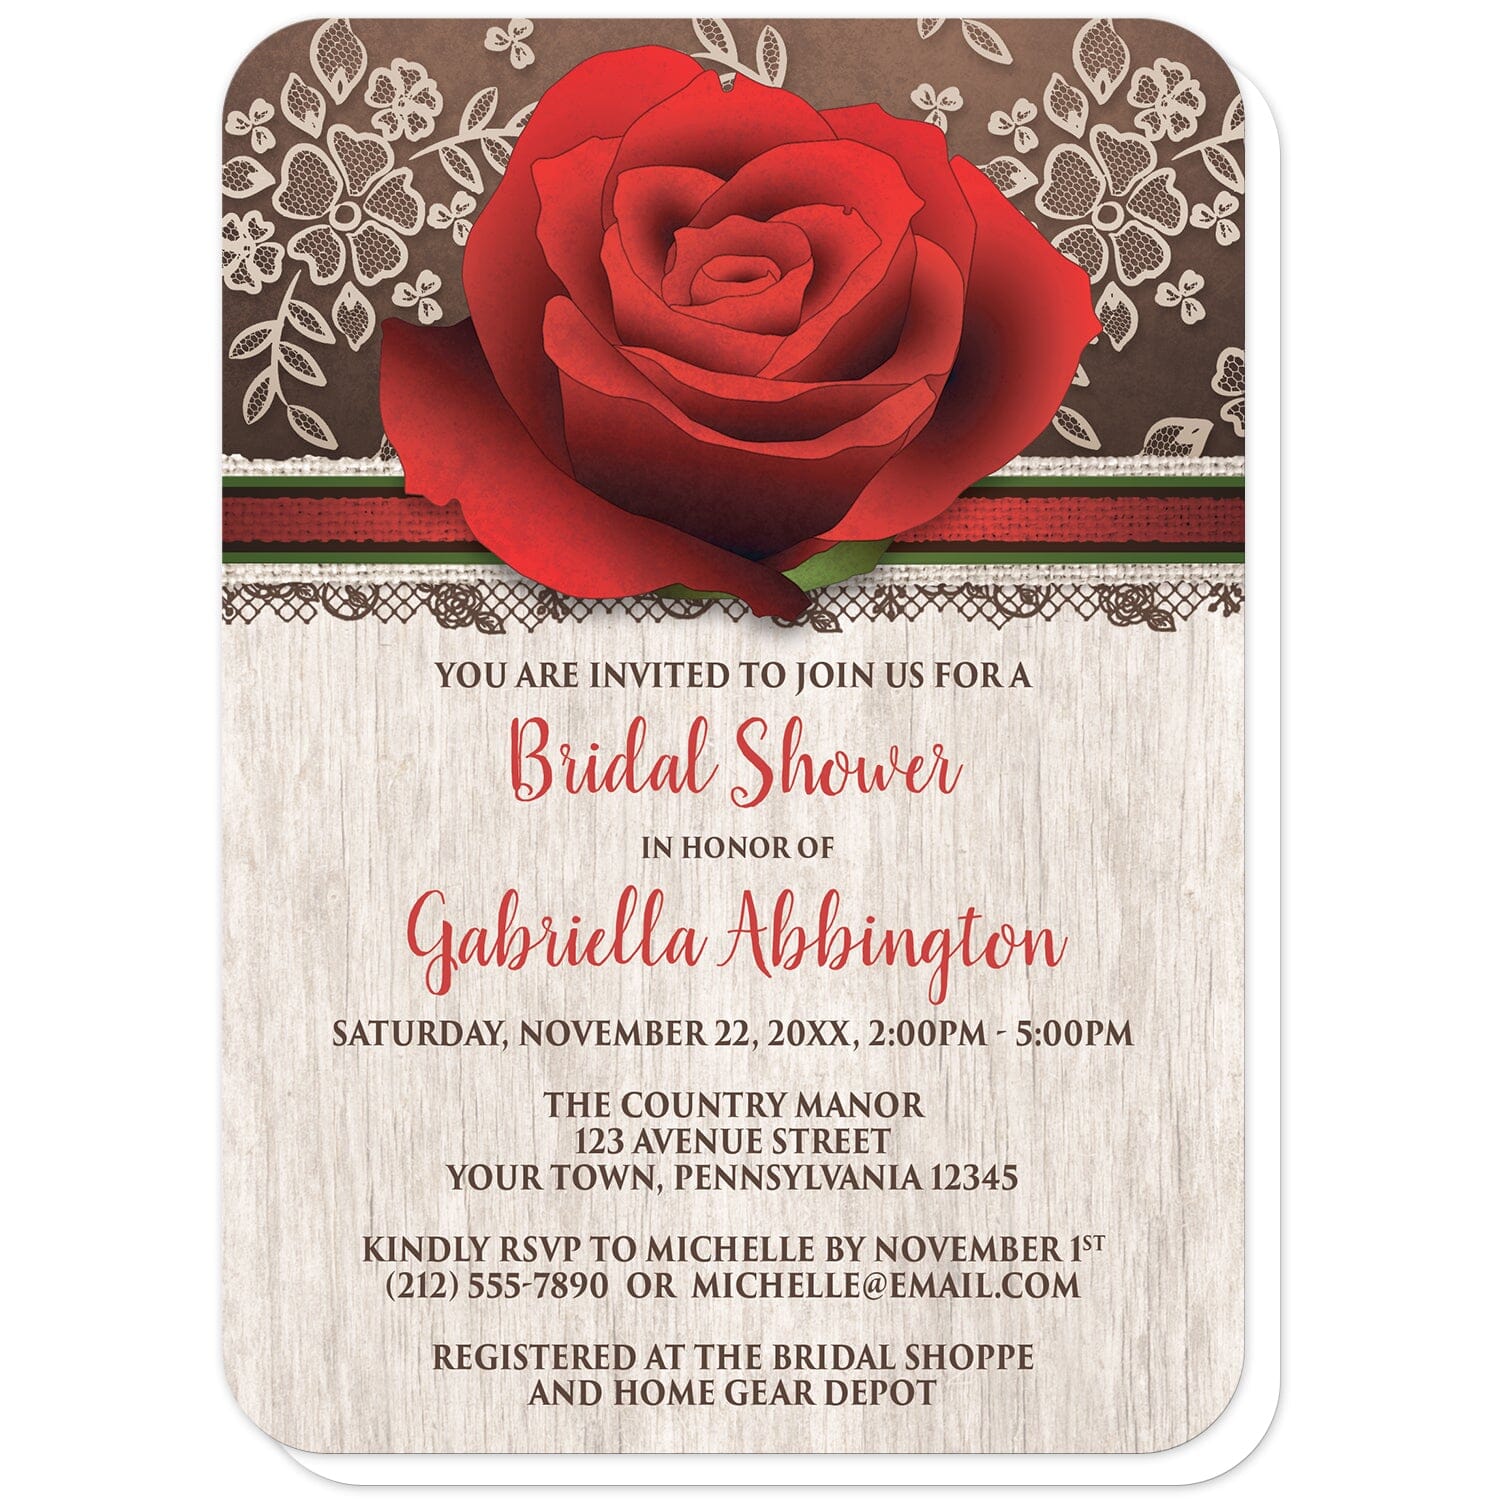 Rustic Wood Lace Red Rose Bridal Shower Invitations (with rounded corners) at Artistically Invited. Beautiful rustic wood lace red rose bridal shower invitations with a lovely large red rose illustration over a rich brown background with a cream lace design at the top of the invitations. Your personalized bridal shower celebration details are custom printed in red and brown over a light wood pattern background below the red rose. 